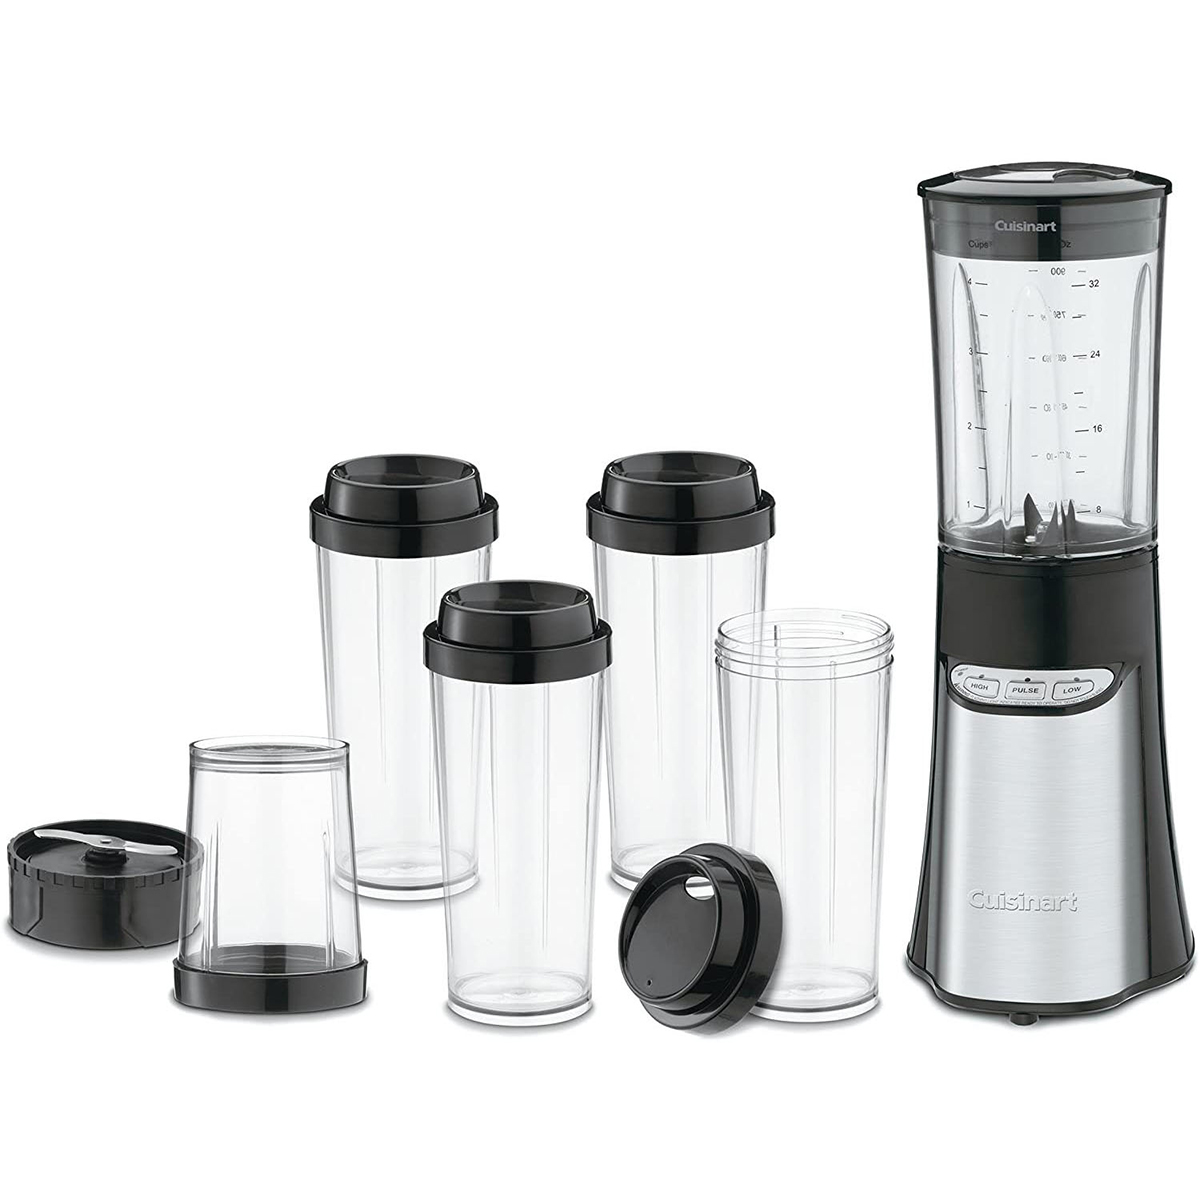 Cuisinart(R) Compact Portable Blending/Chopping System